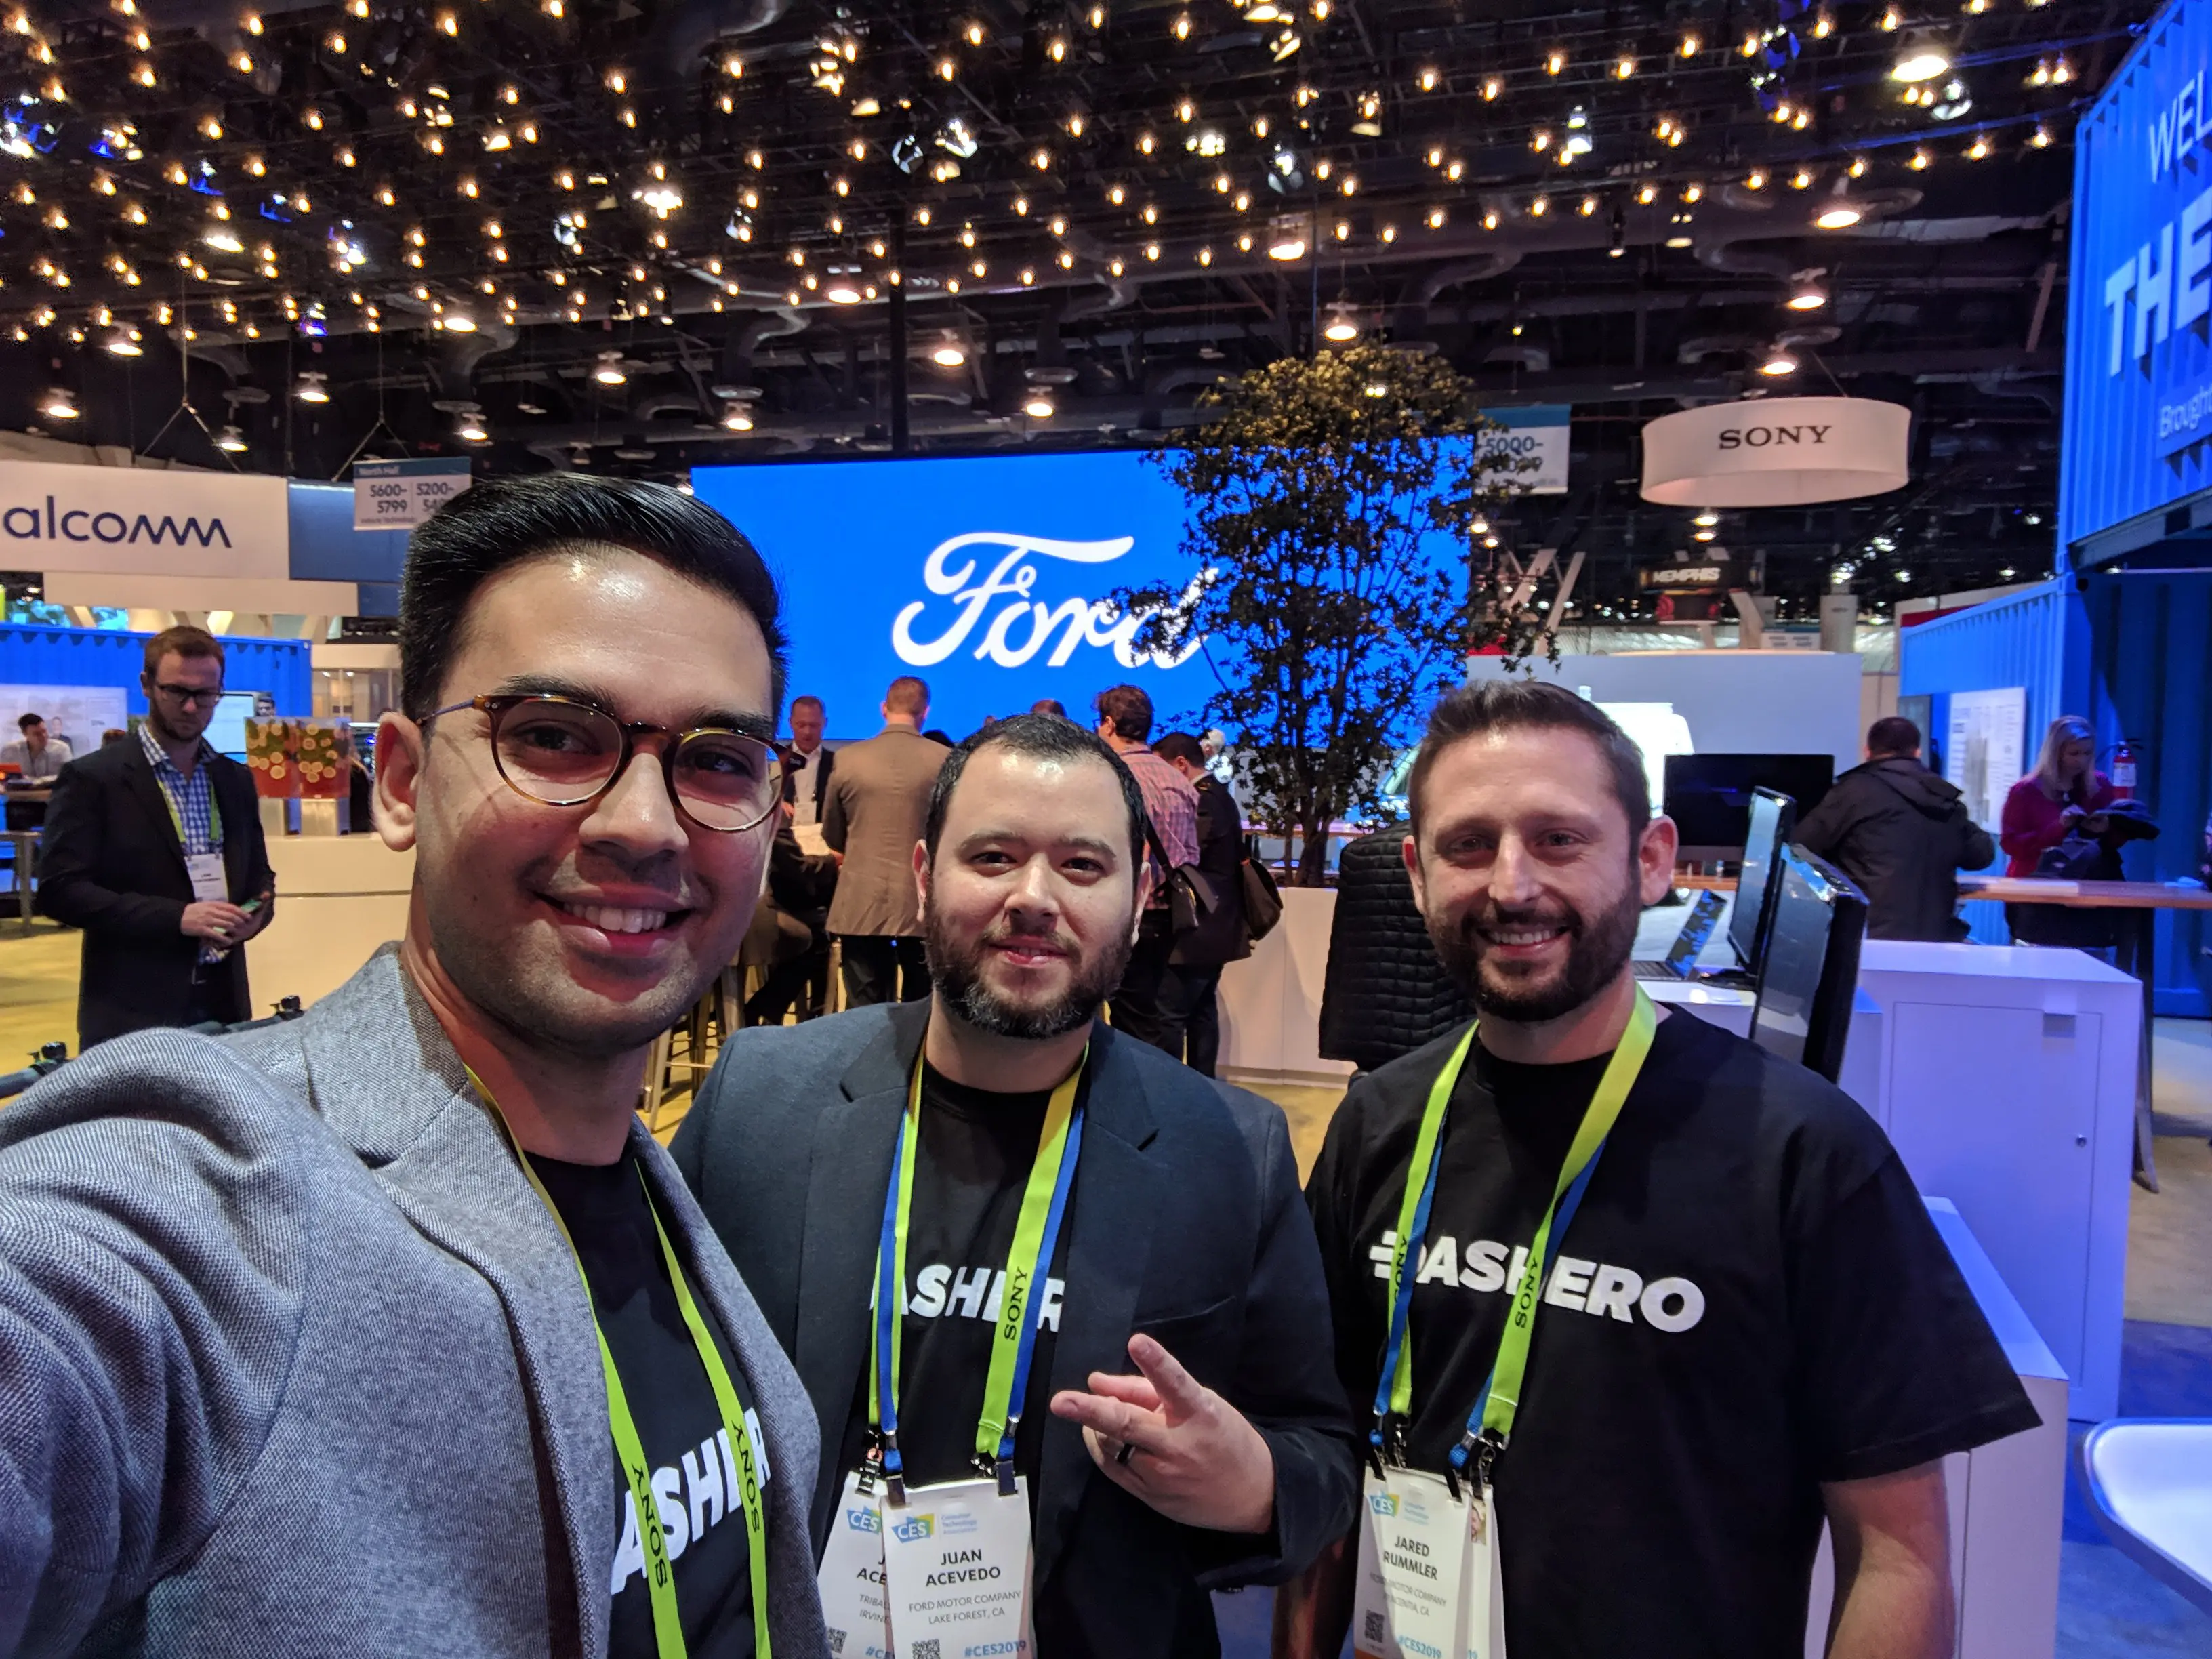 Dashero Founders at CES